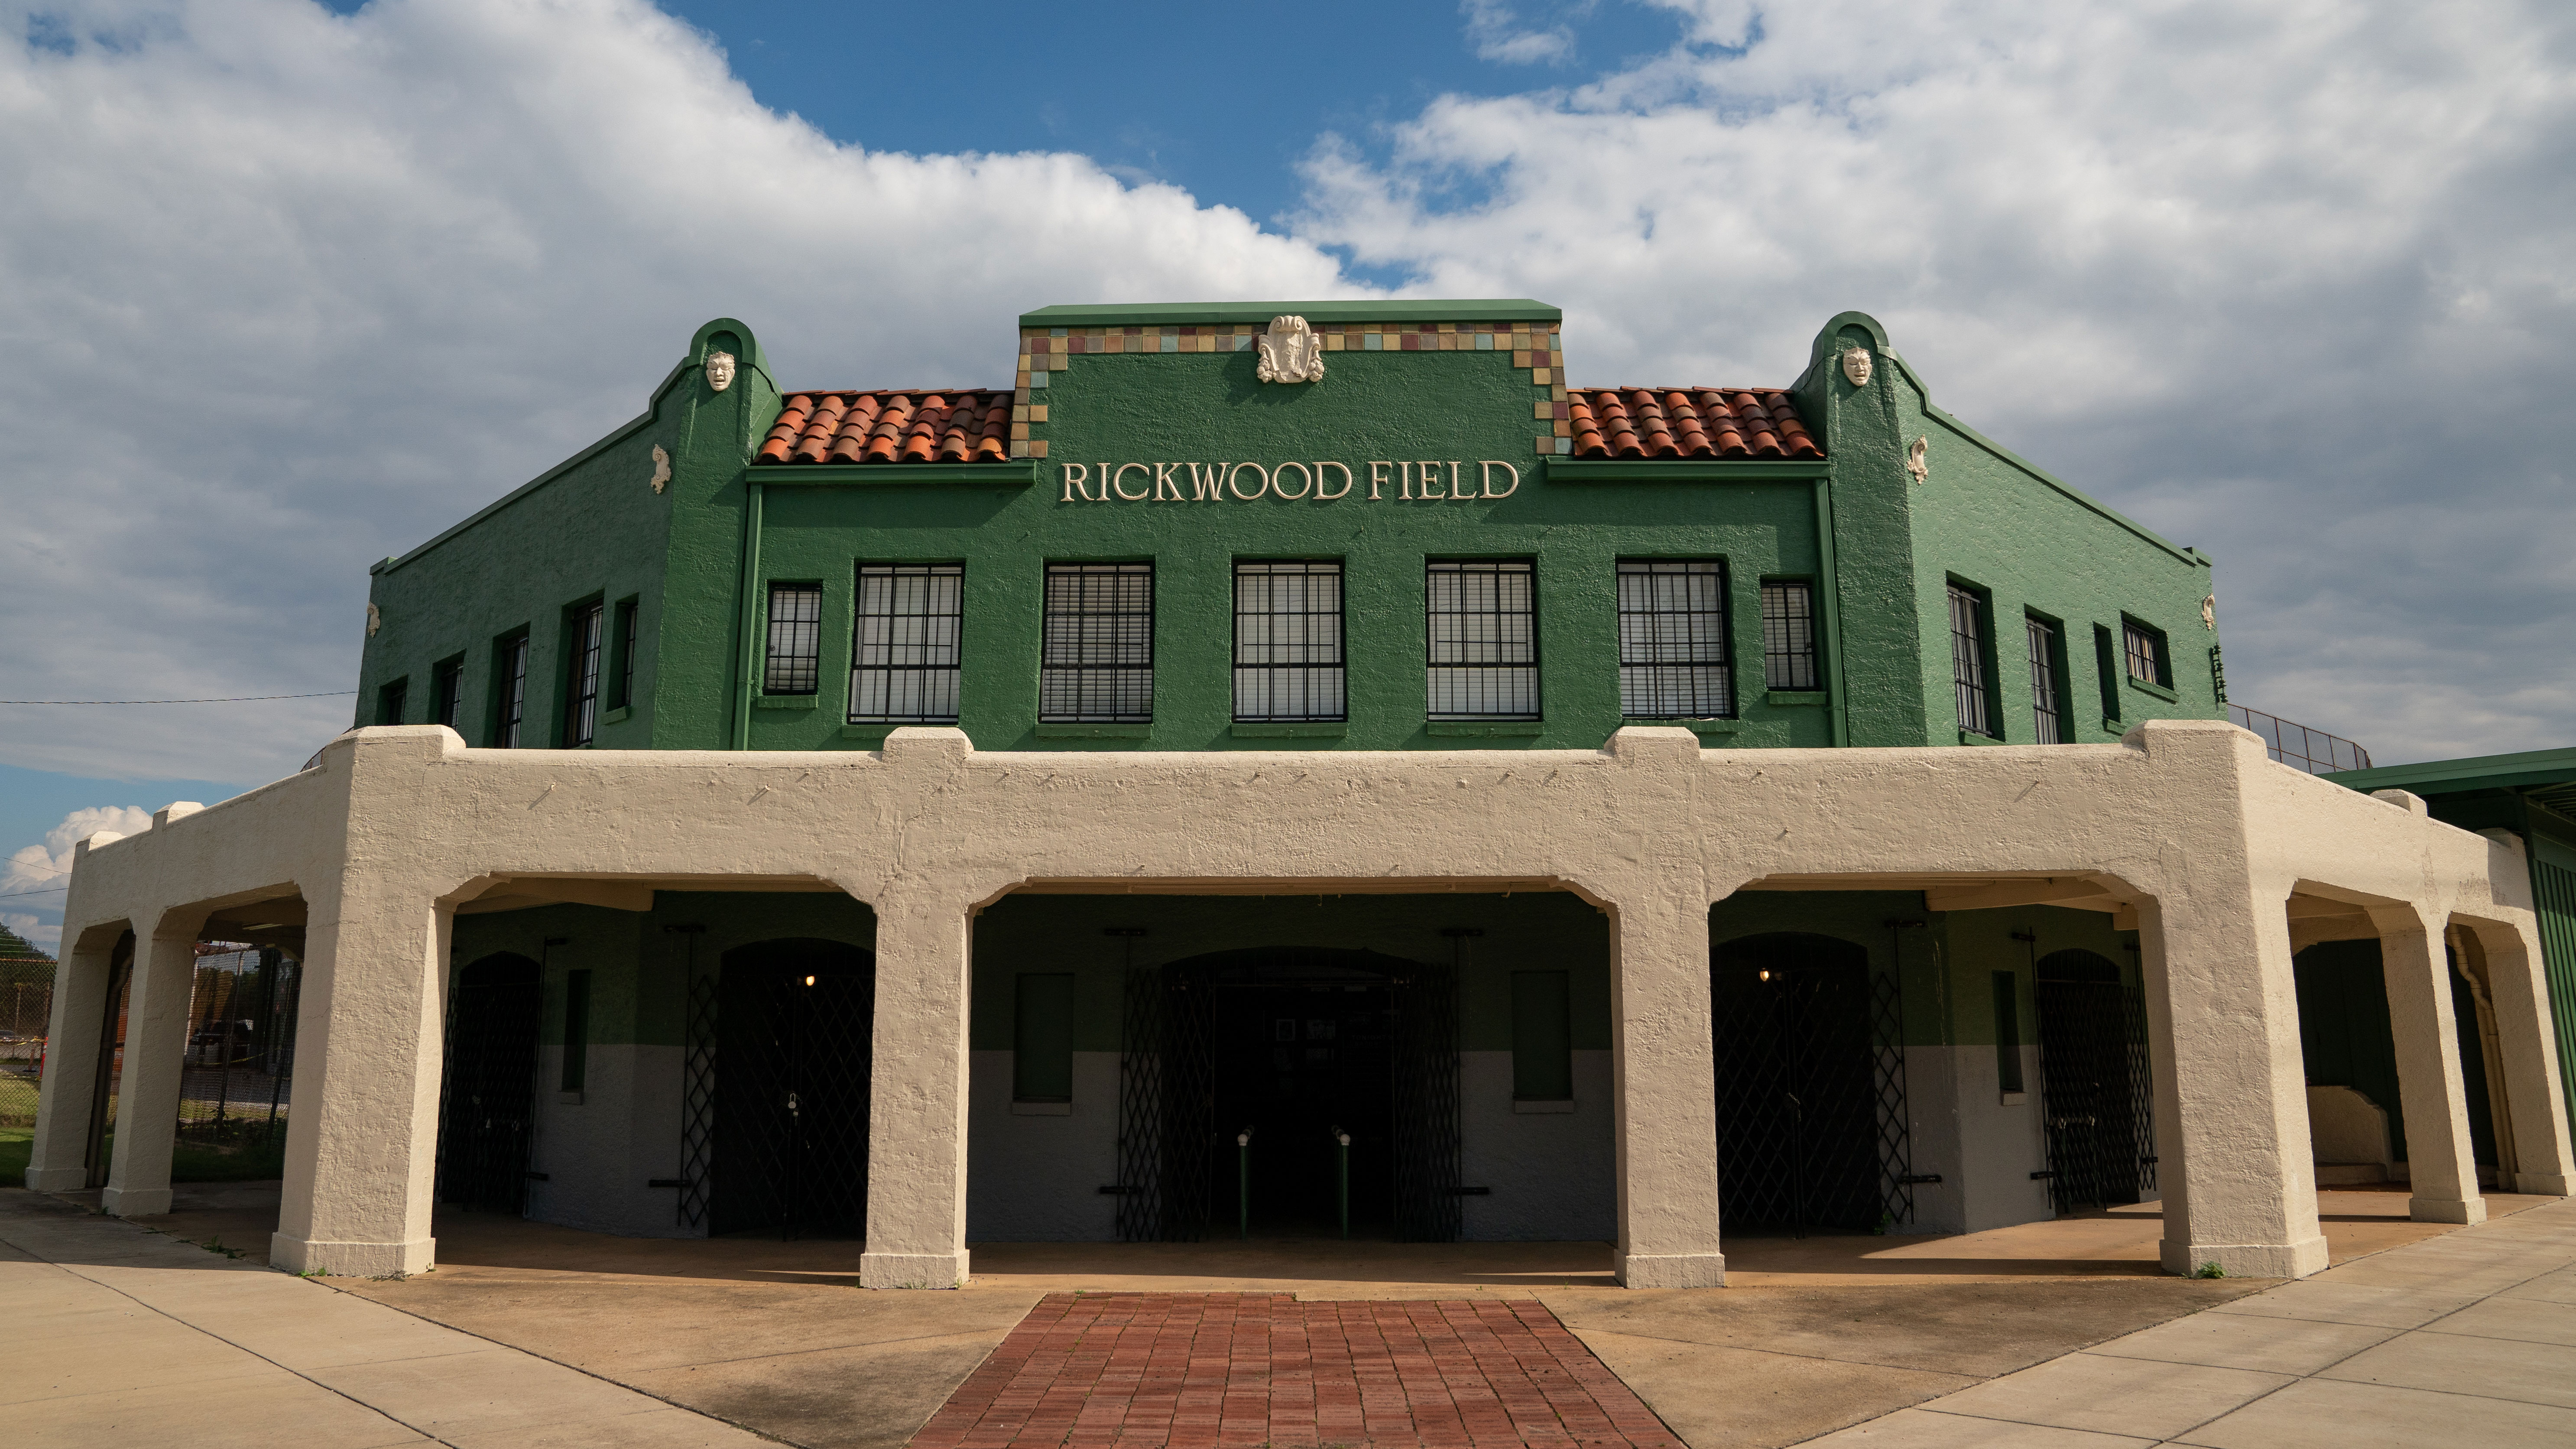 What to know about Rickwood Field ahead of Giants-Cardinals game